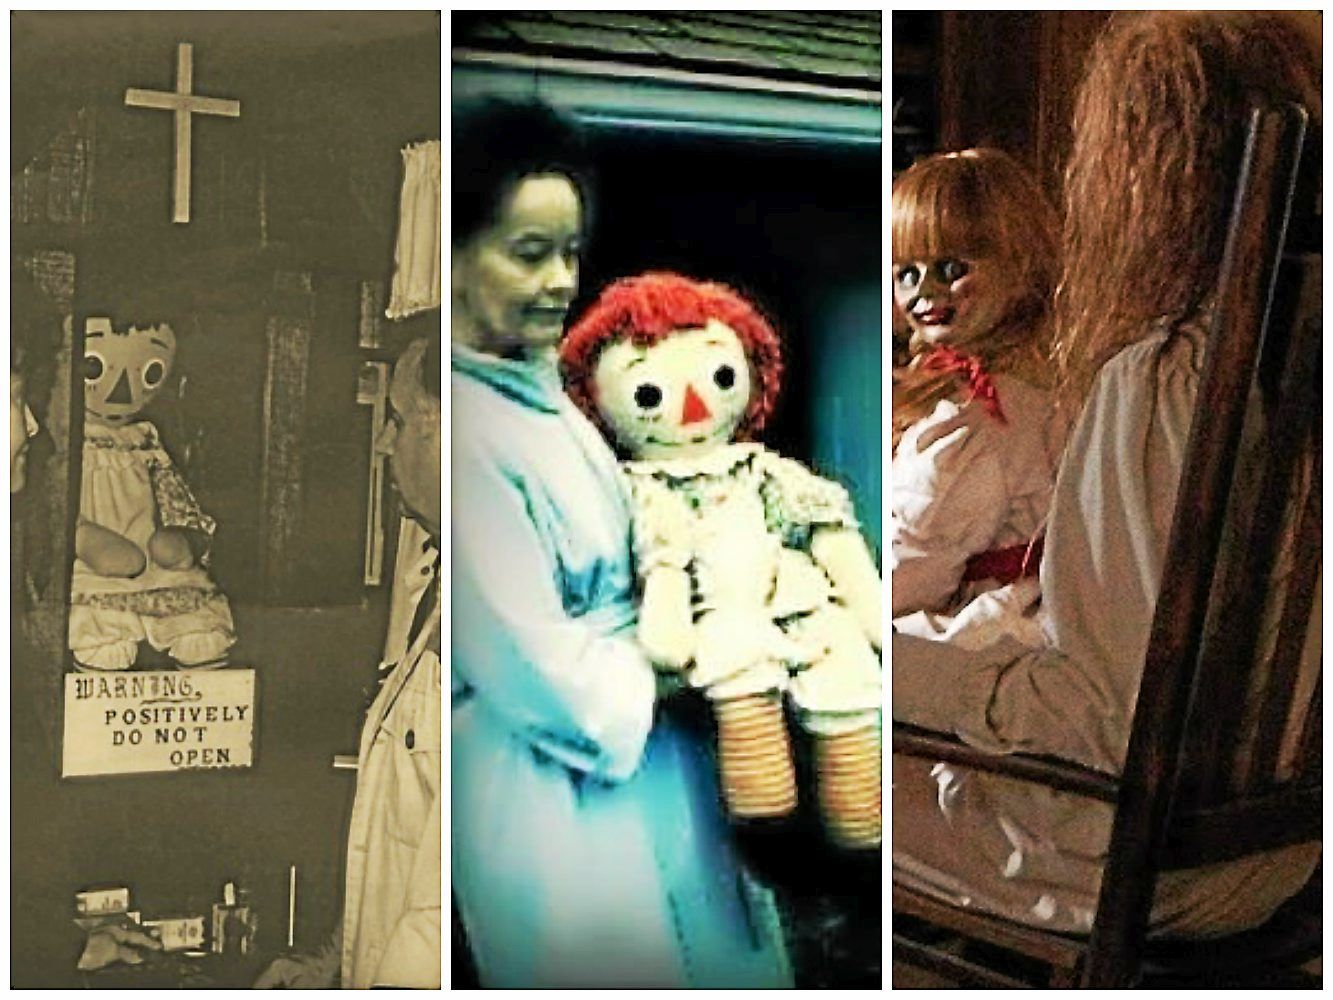 Real 'Annabelle' story shared by 